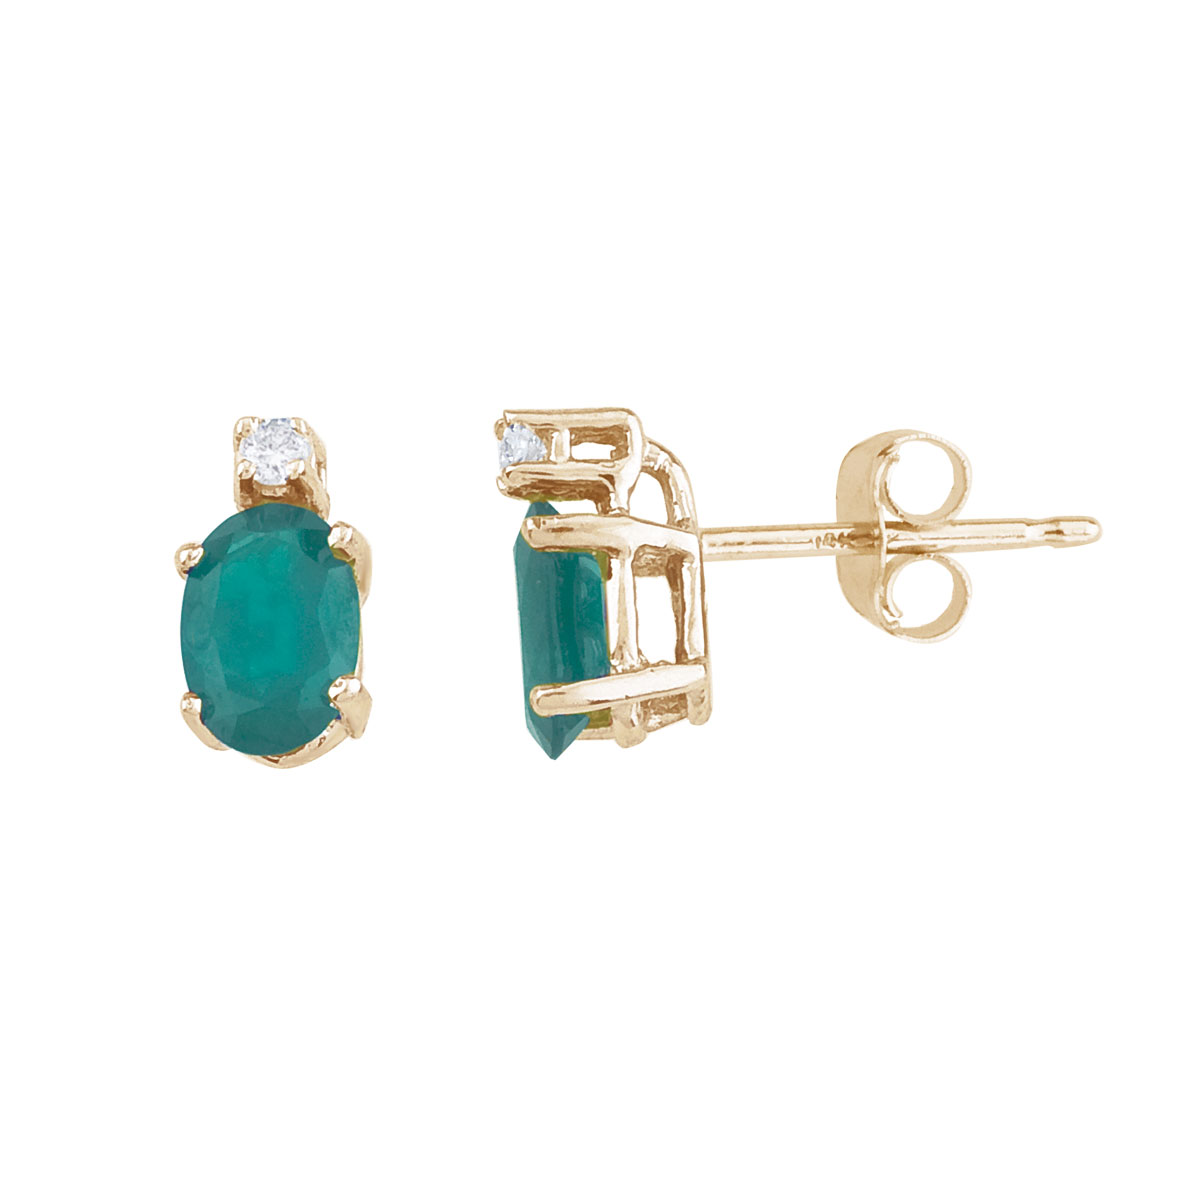 JCX2314: These 6x4 mm oval emerald earrings are set in beautiful 14k yellow gold and feature .04 total carat diamonds.